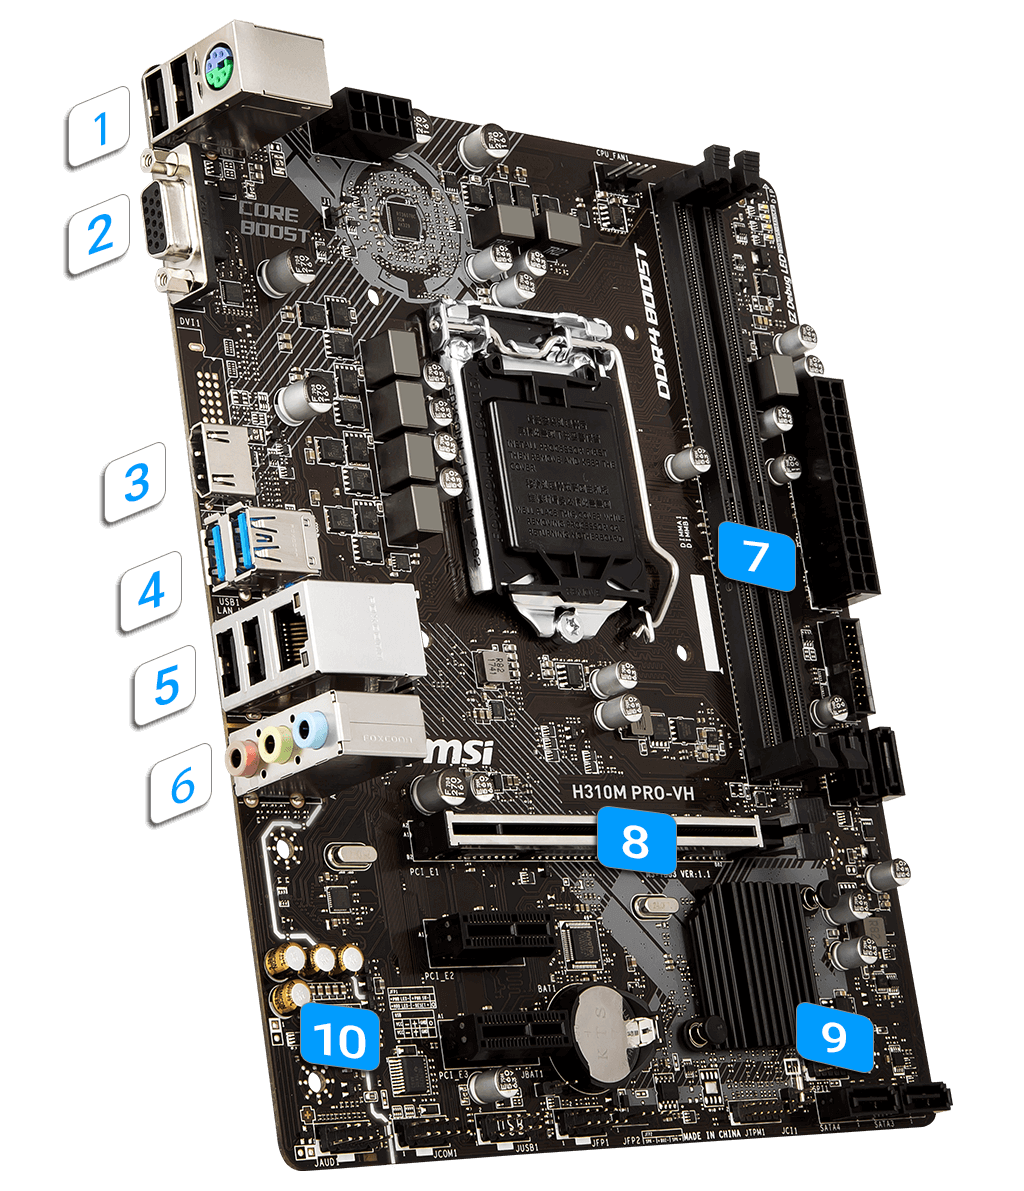 MSI H310M PRO-VH overview